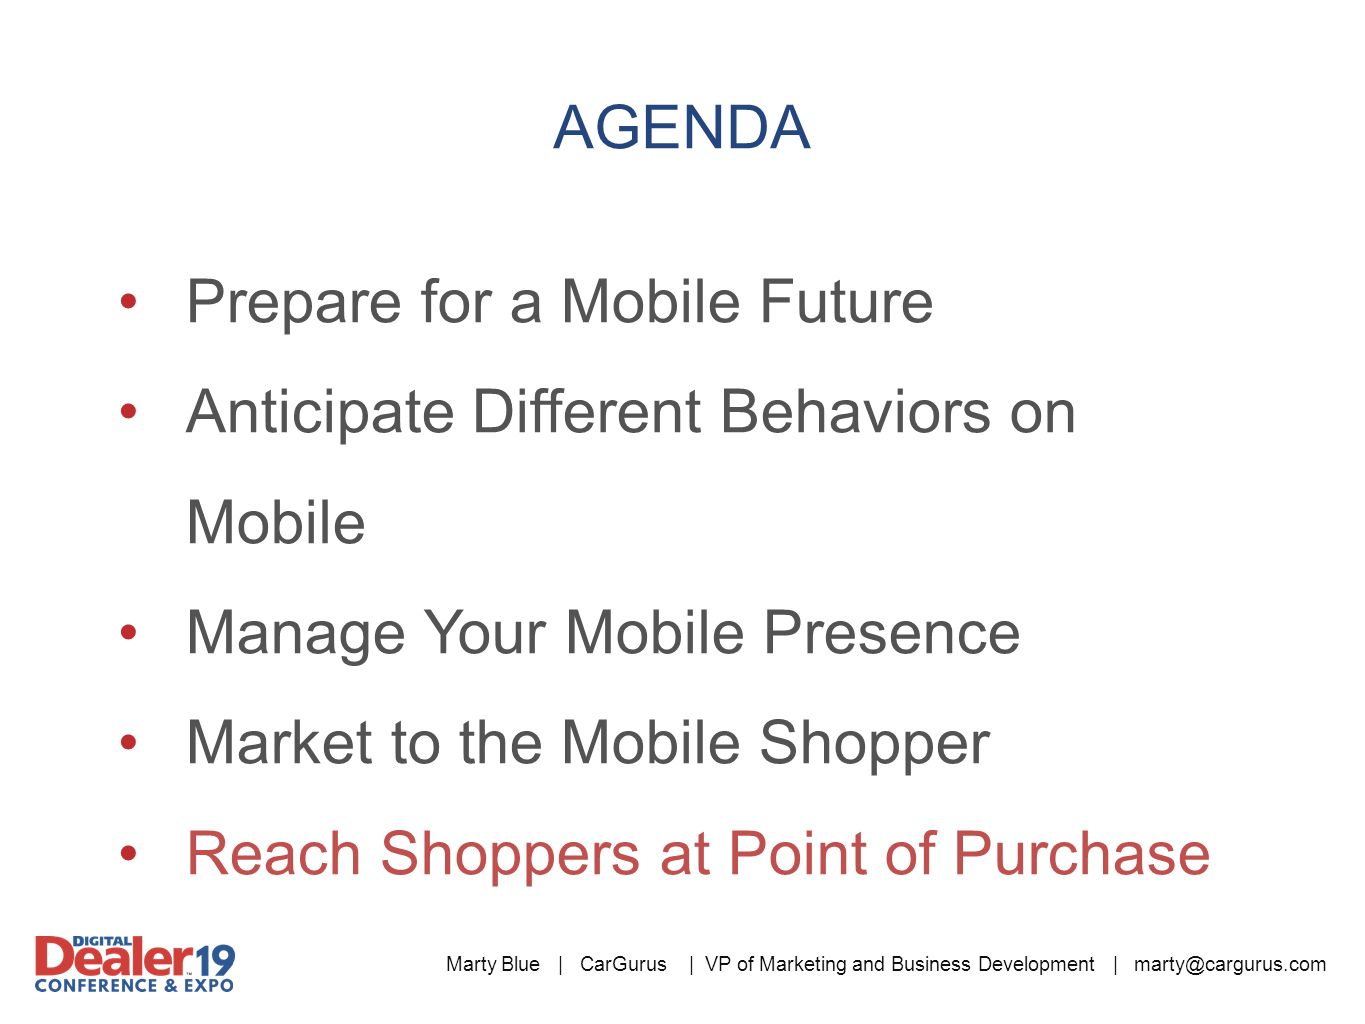 Marty Blue | CarGurus | VP of Marketing and Business Development | Prepare for a Mobile Future Anticipate Different Behaviors on Mobile Manage Your Mobile Presence Market to the Mobile Shopper Reach Shoppers at Point of Purchase AGENDA